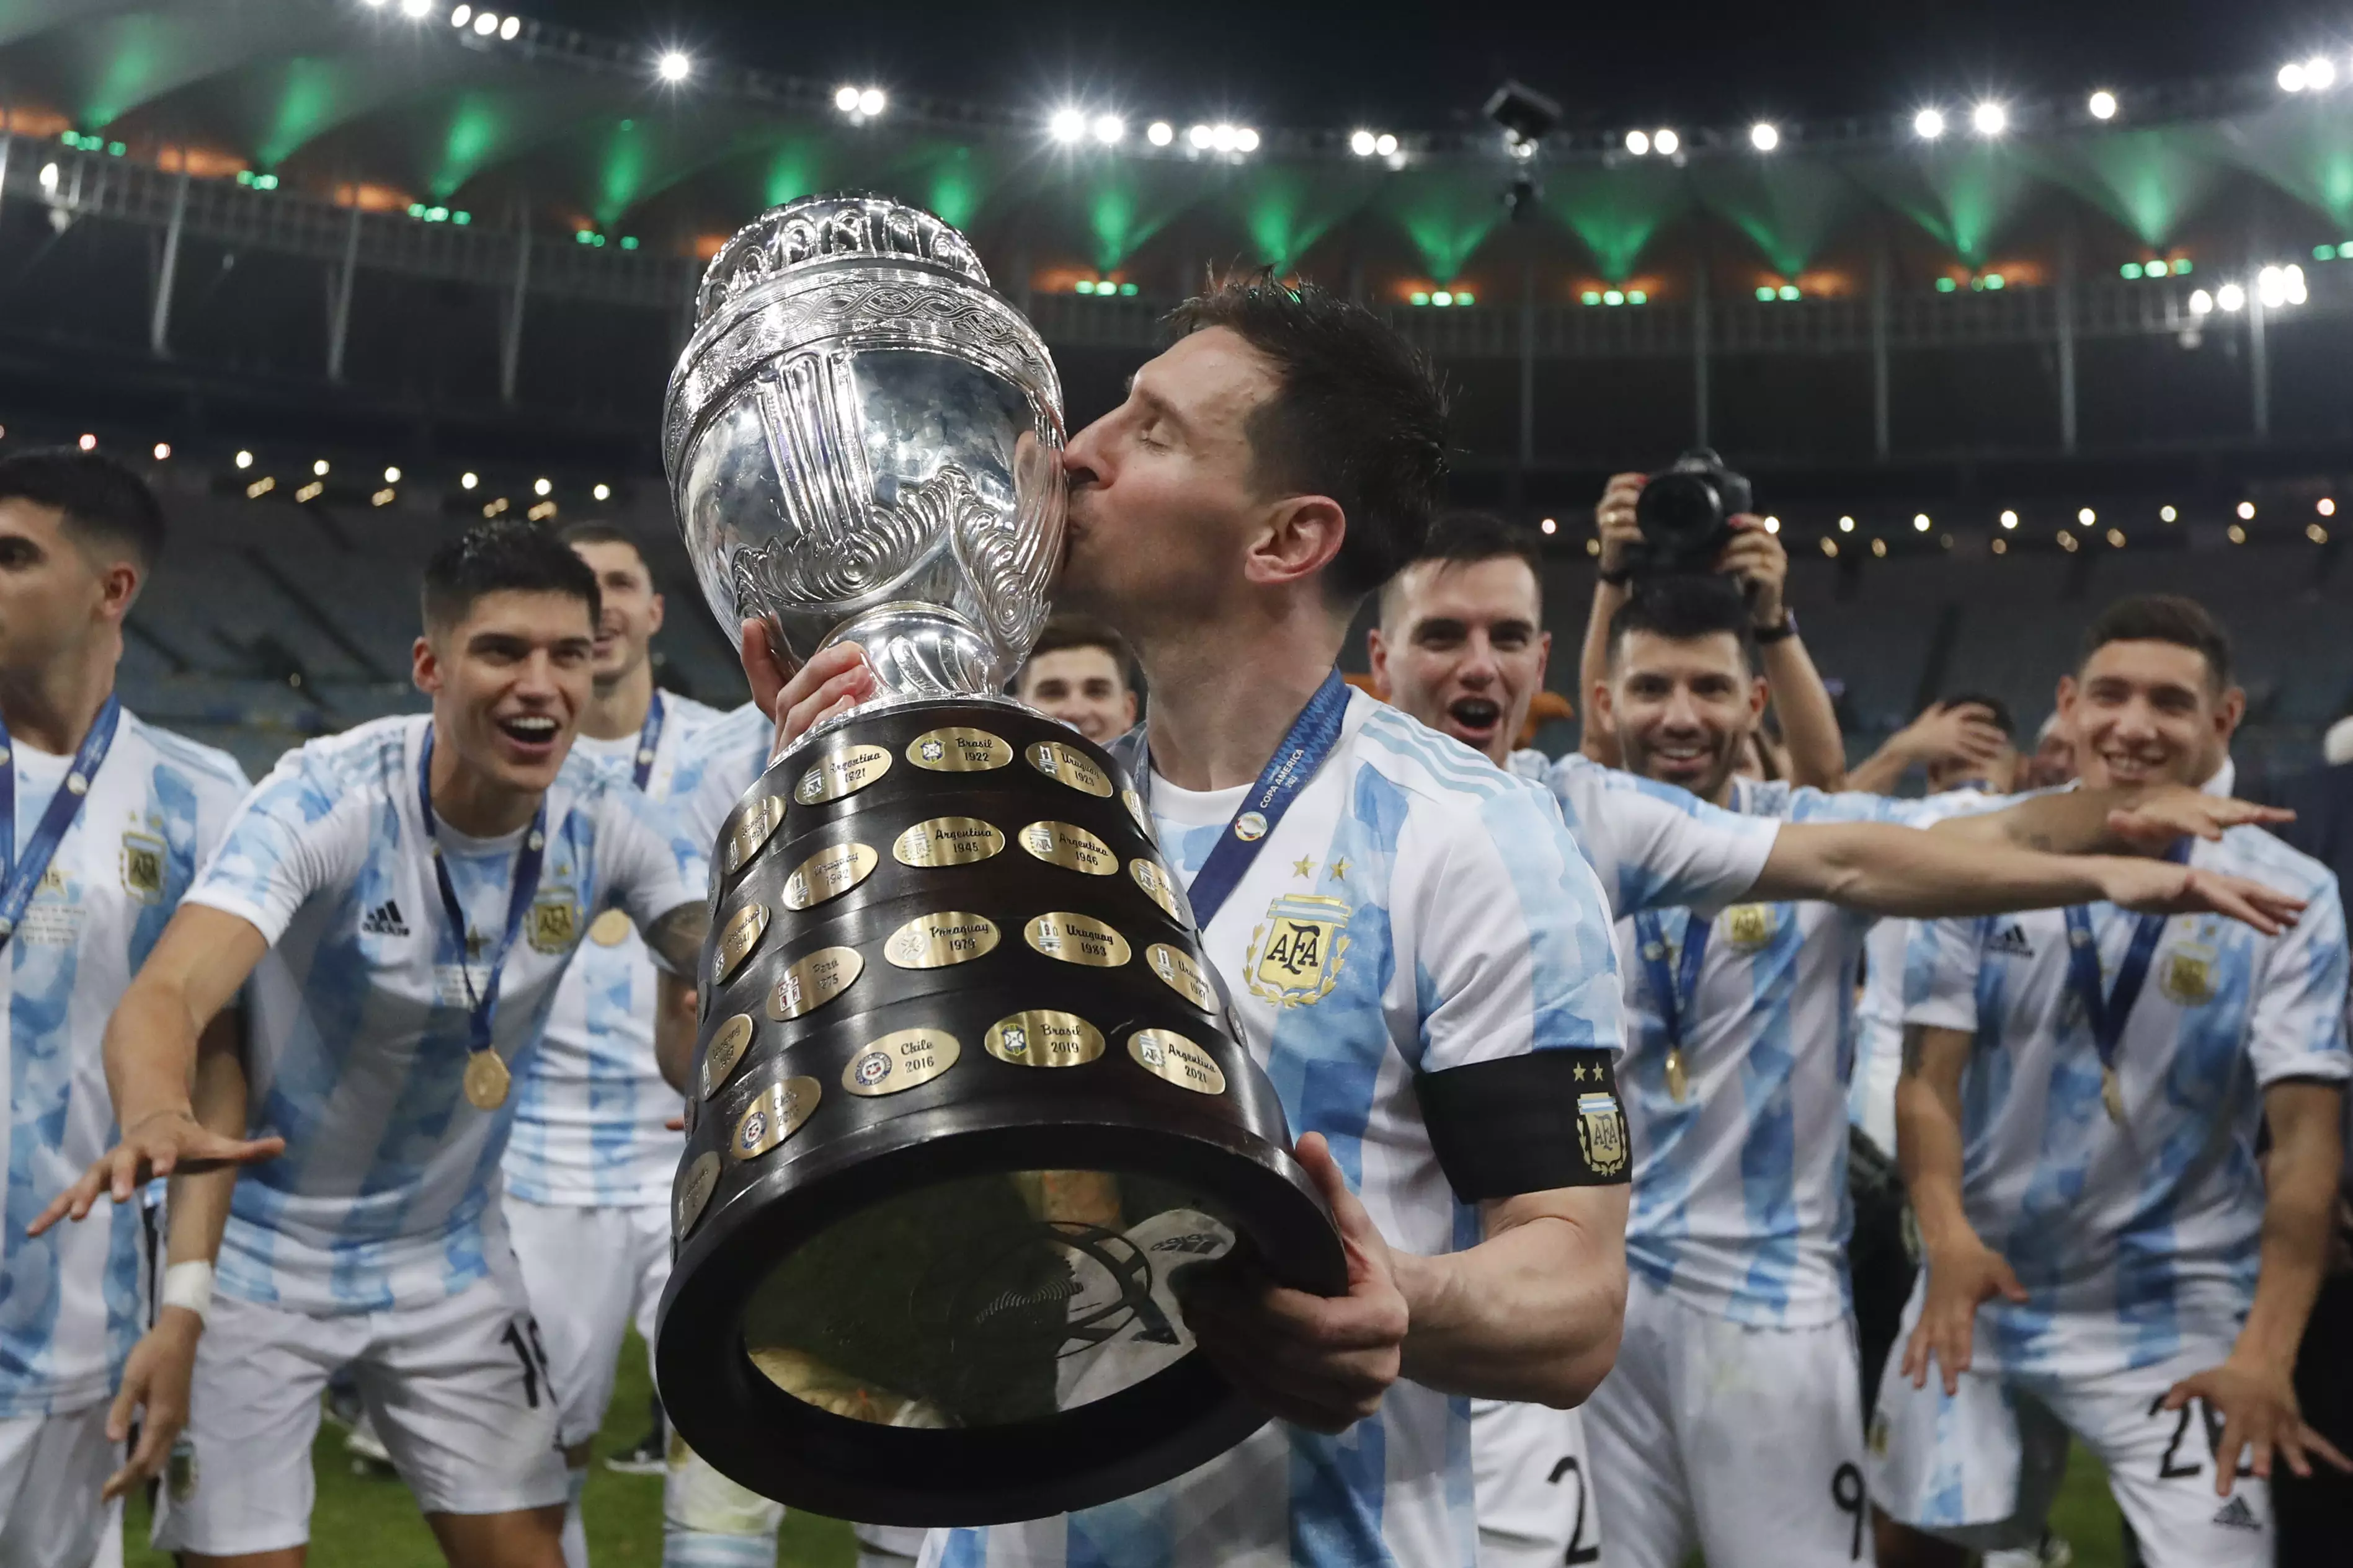 Messi gives the Copa America trophy a kiss. Image: PA Images